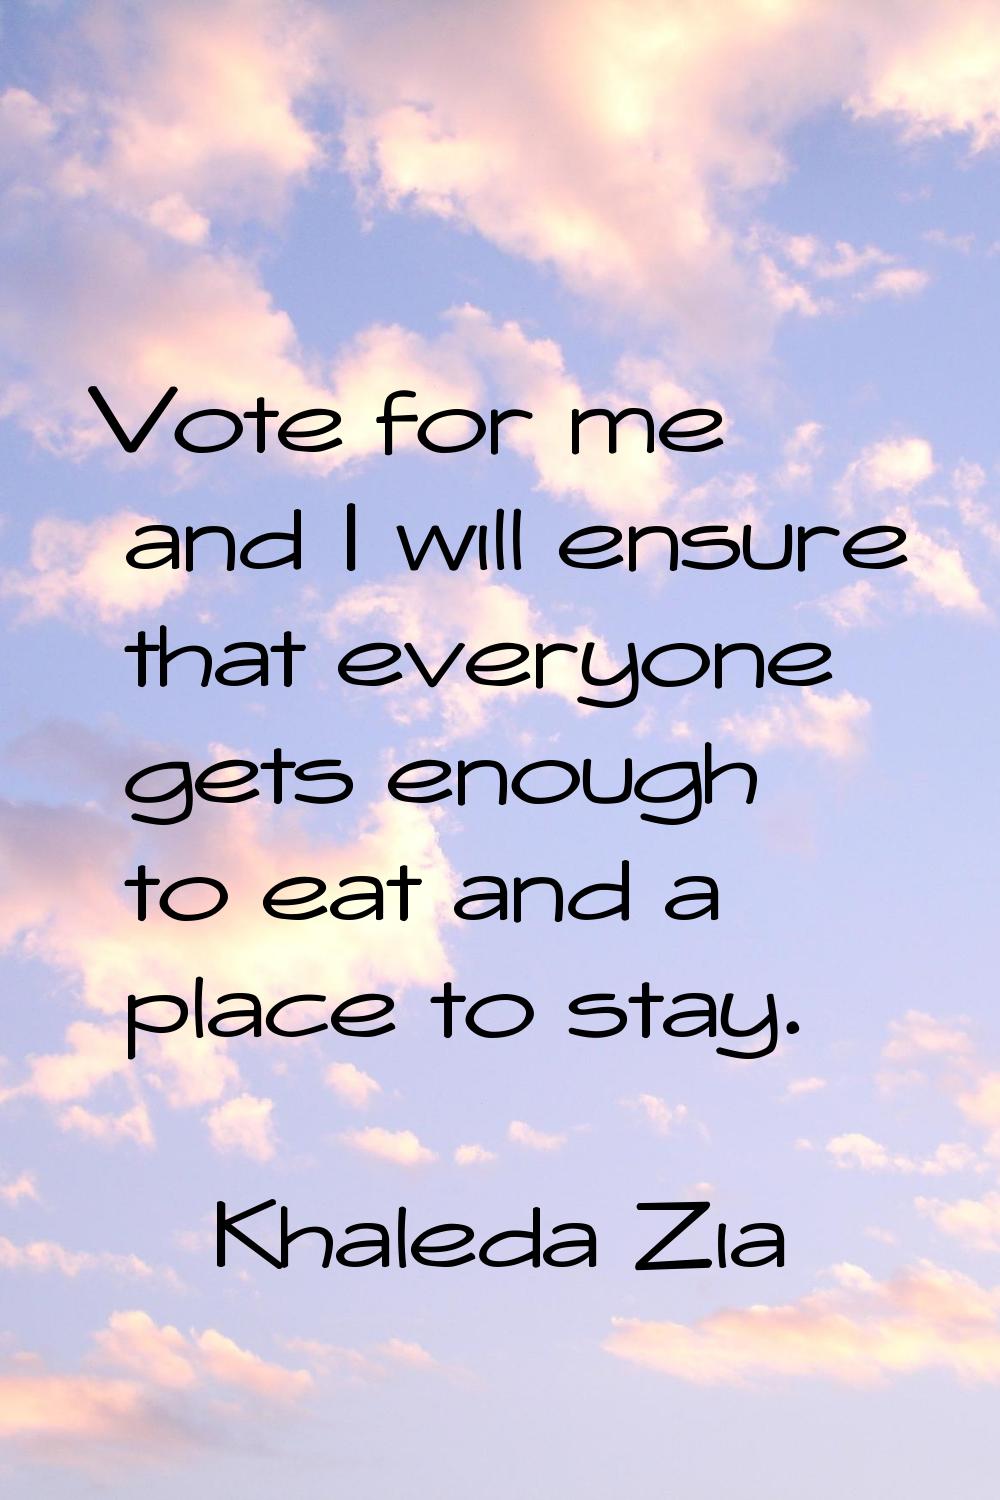 Vote for me and I will ensure that everyone gets enough to eat and a place to stay.